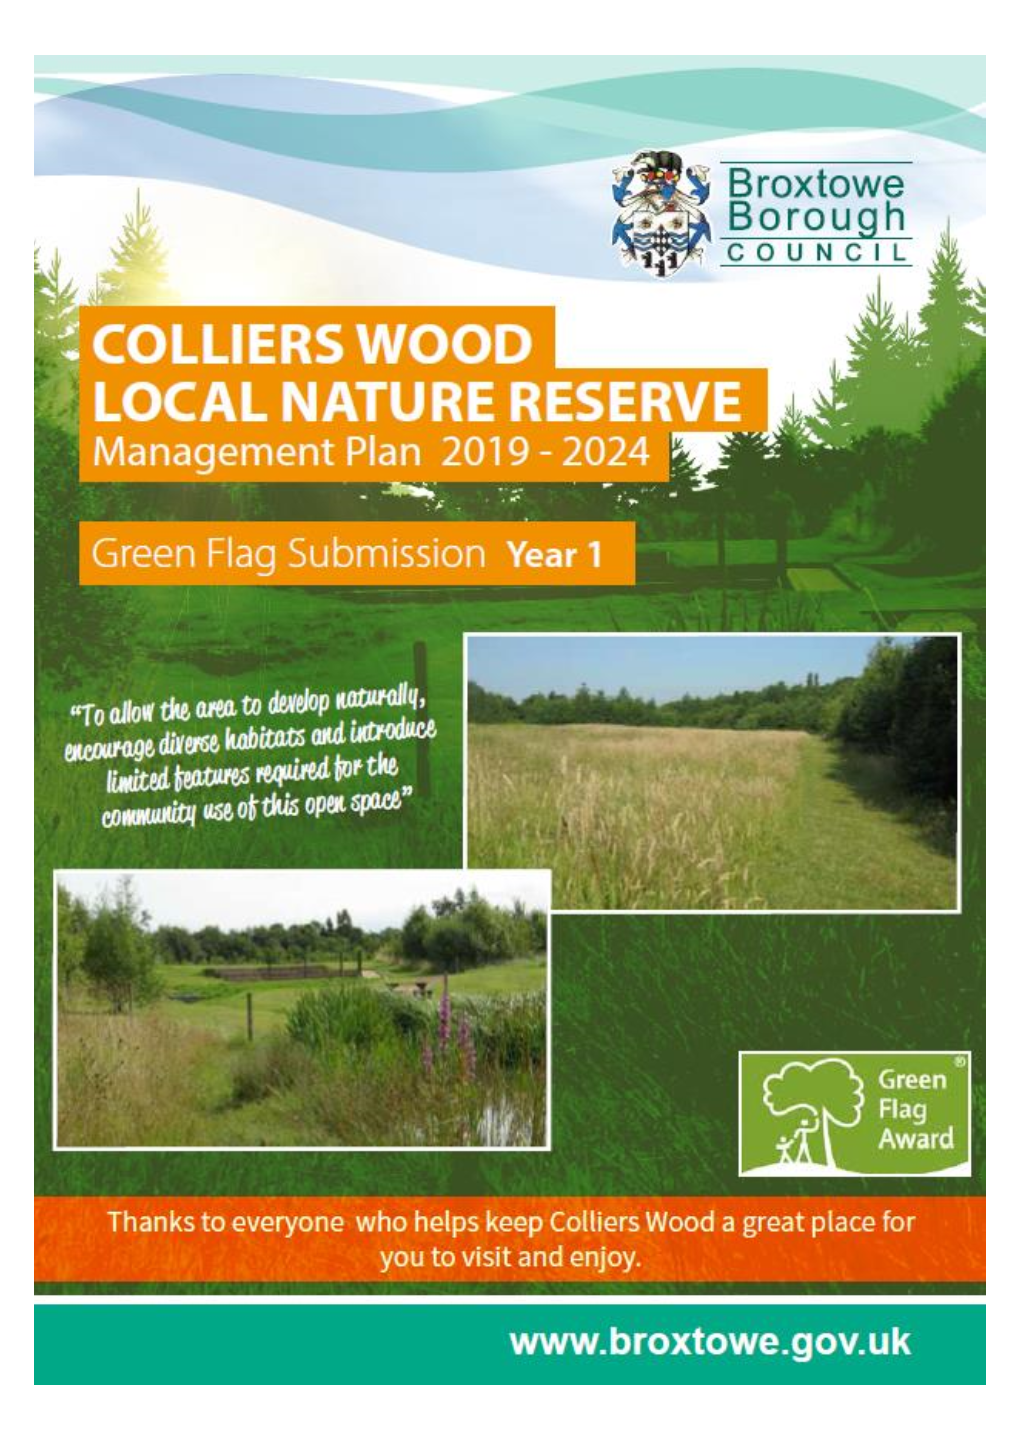 Colliers Wood Local Nature Reserve Management Plan 2019